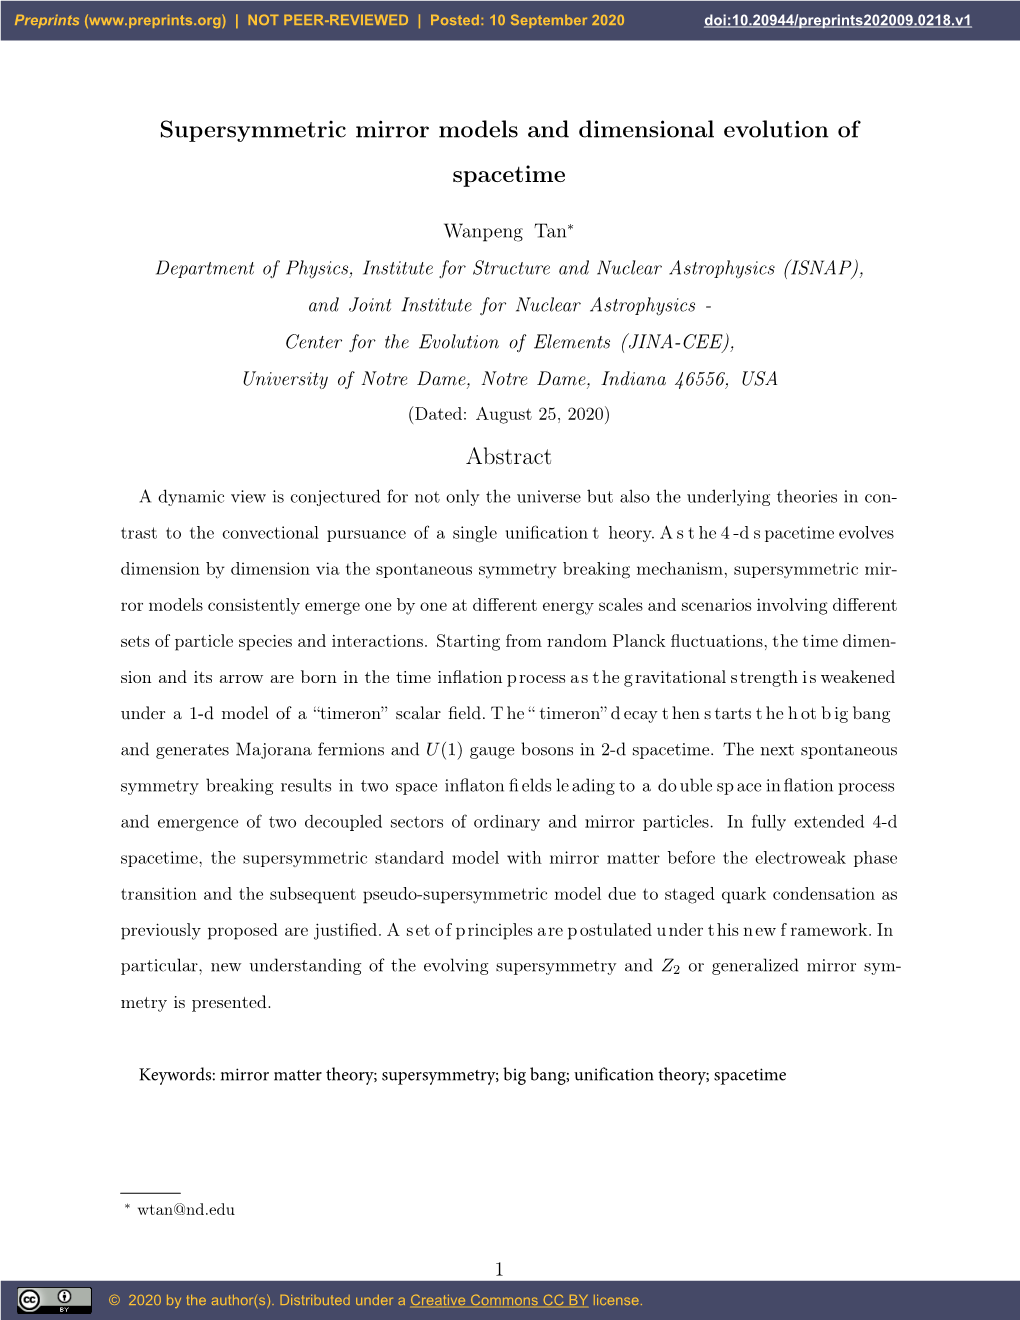 Supersymmetric Mirror Models and Dimensional Evolution of Spacetime